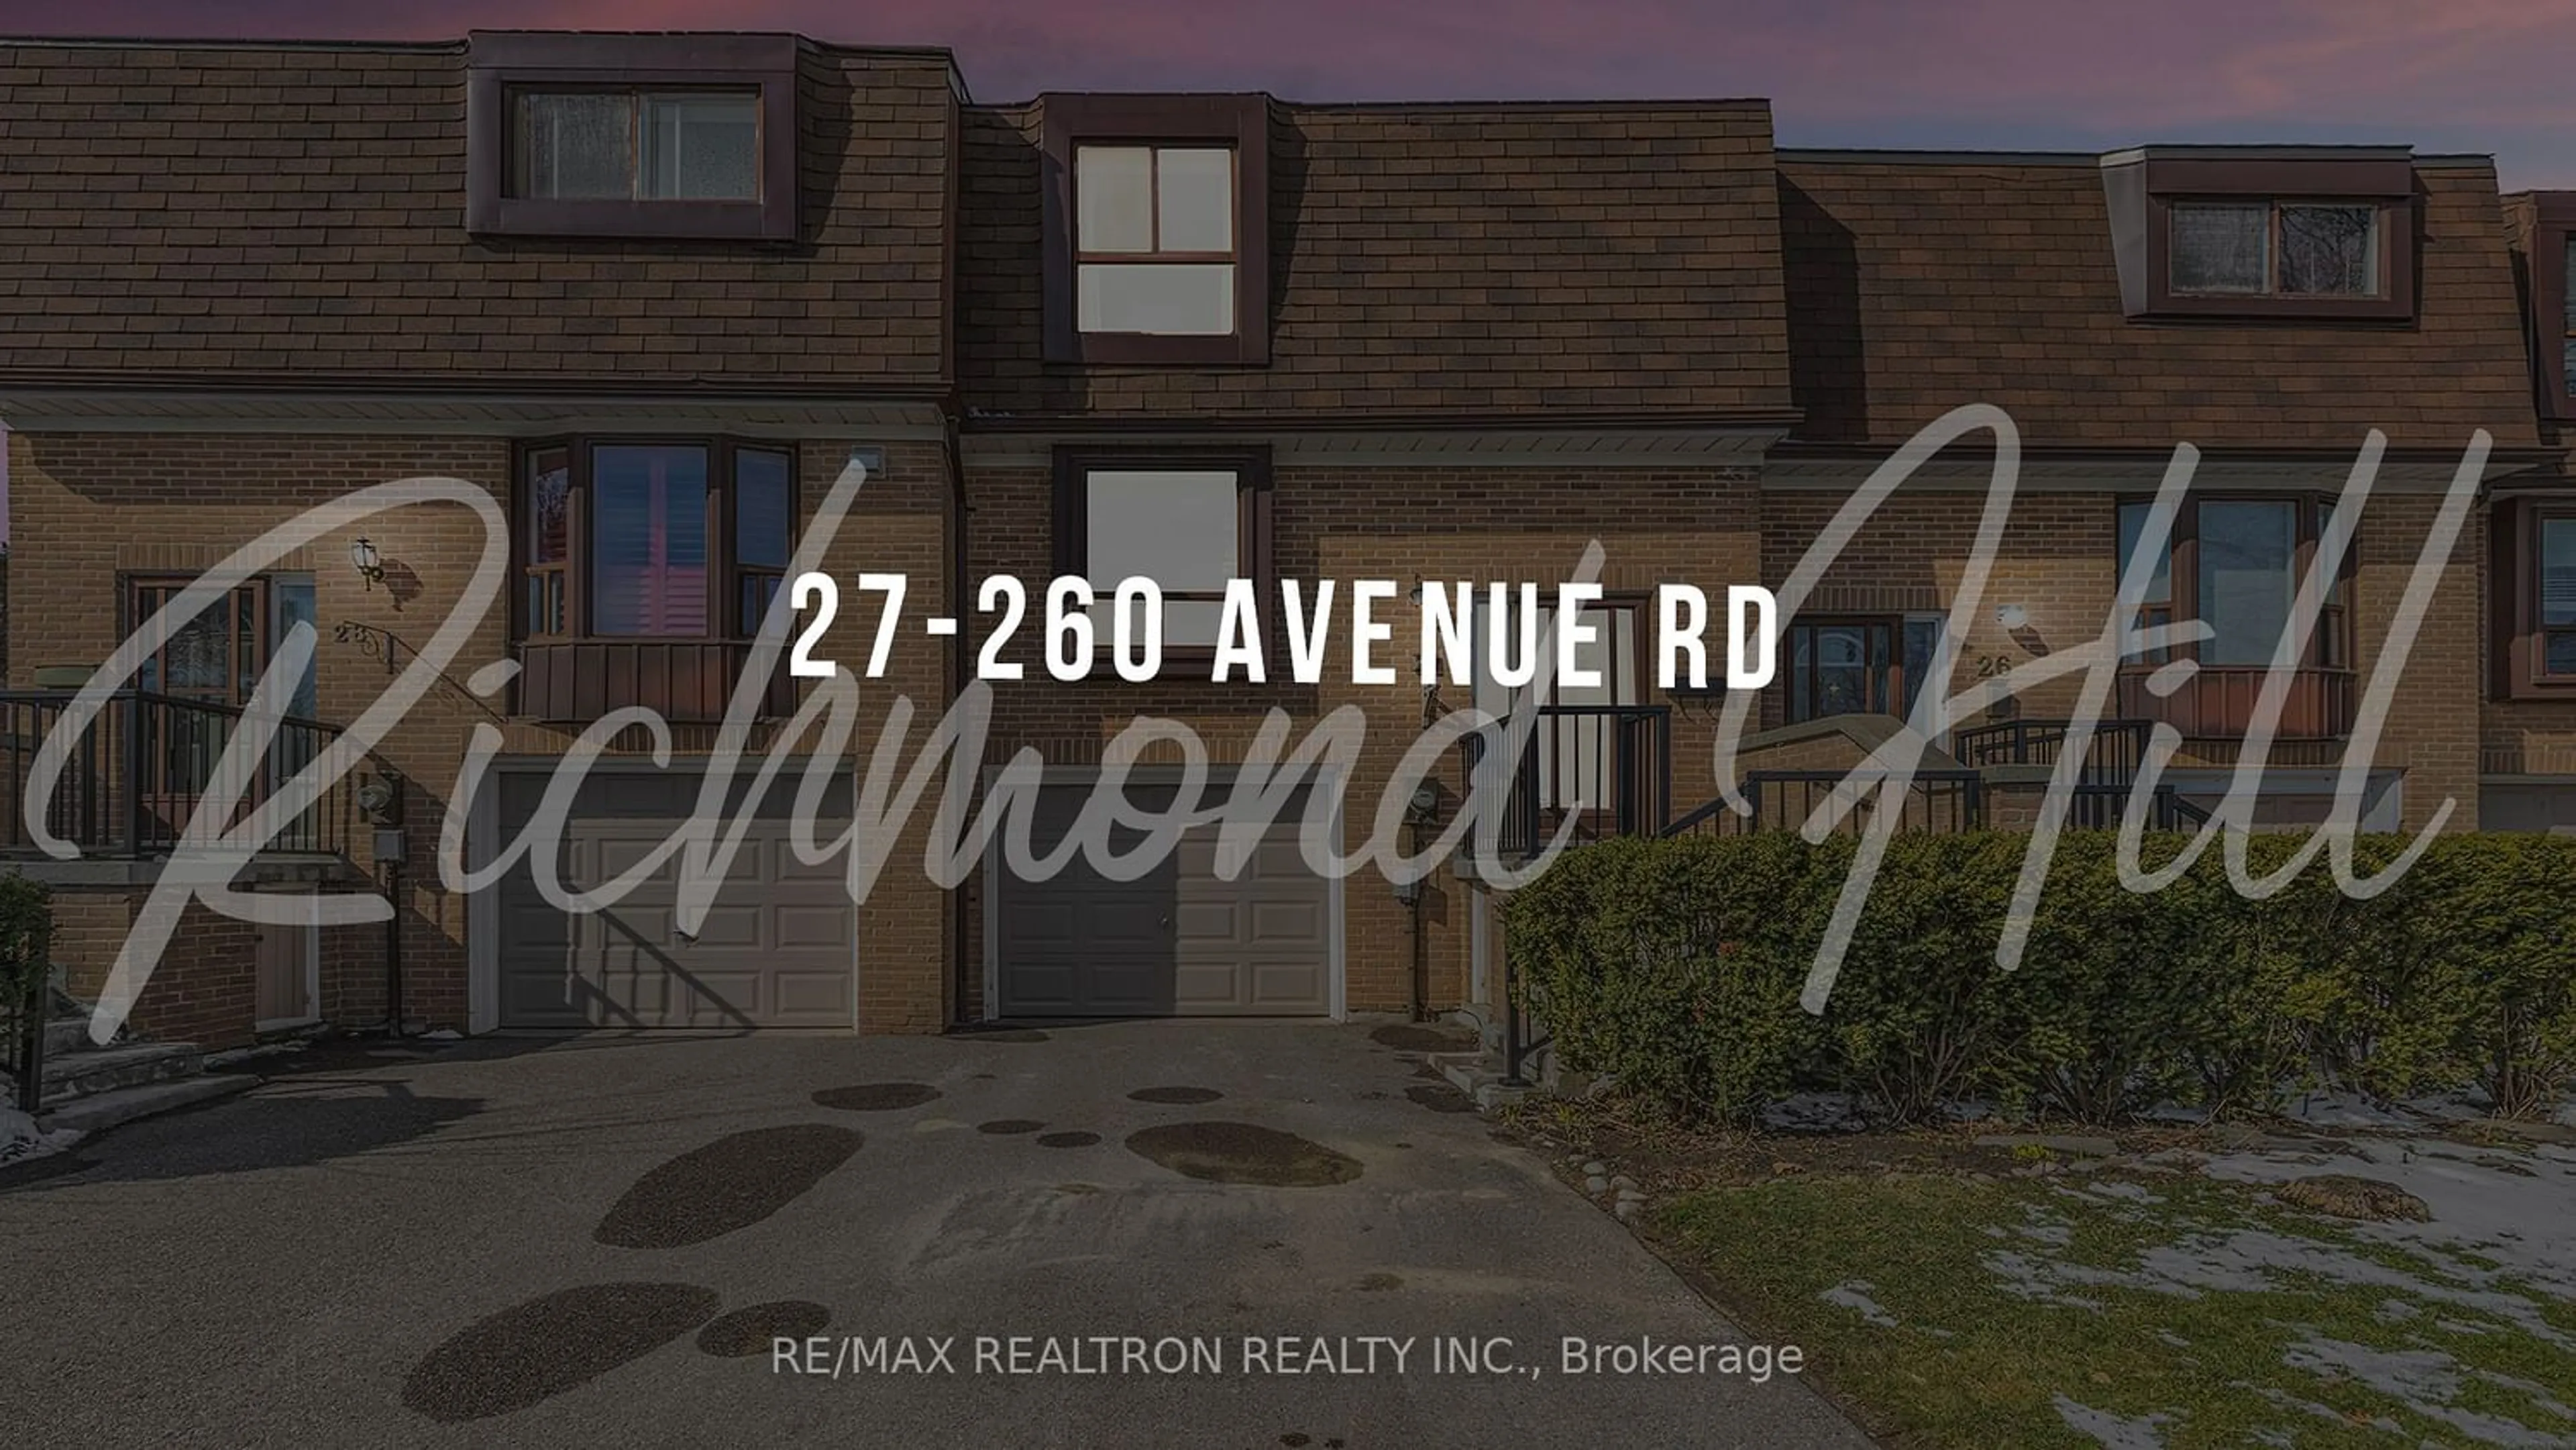 Home with vinyl exterior material for 260 Avenue Rd #27, Richmond Hill Ontario L4C 5G6